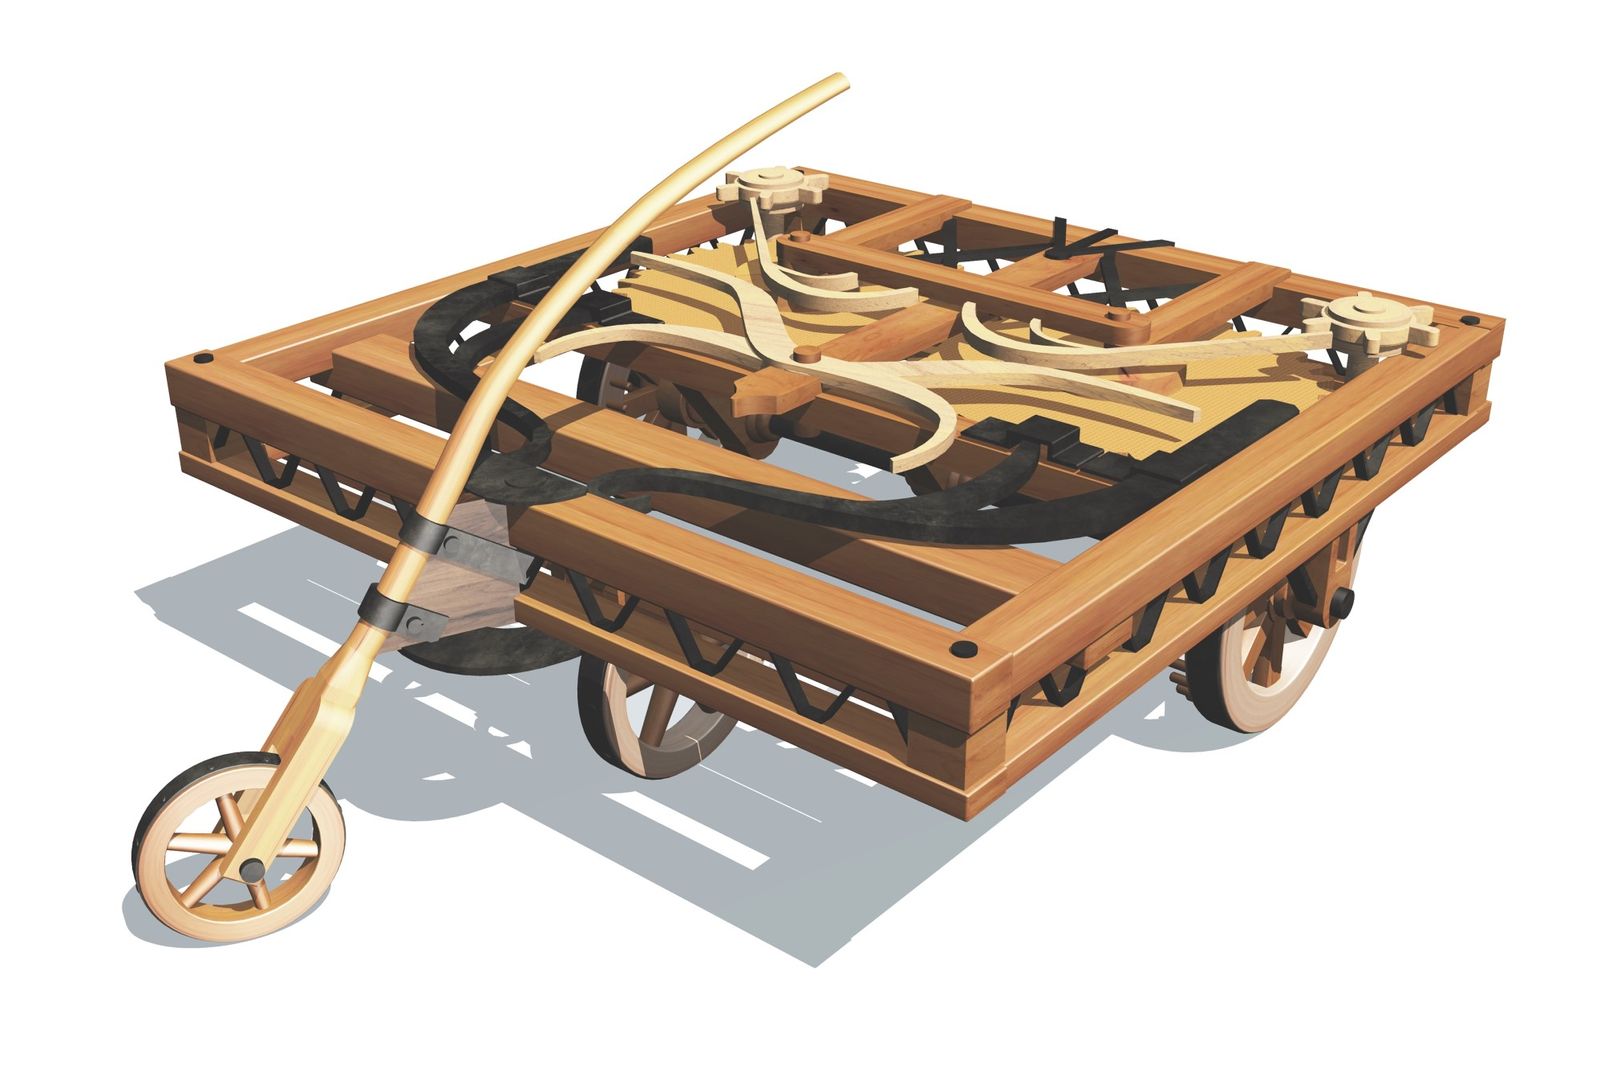 This rendering depicts a self-driving, self-propelled cart designed by Leonardo da Vinci in the 16th century.